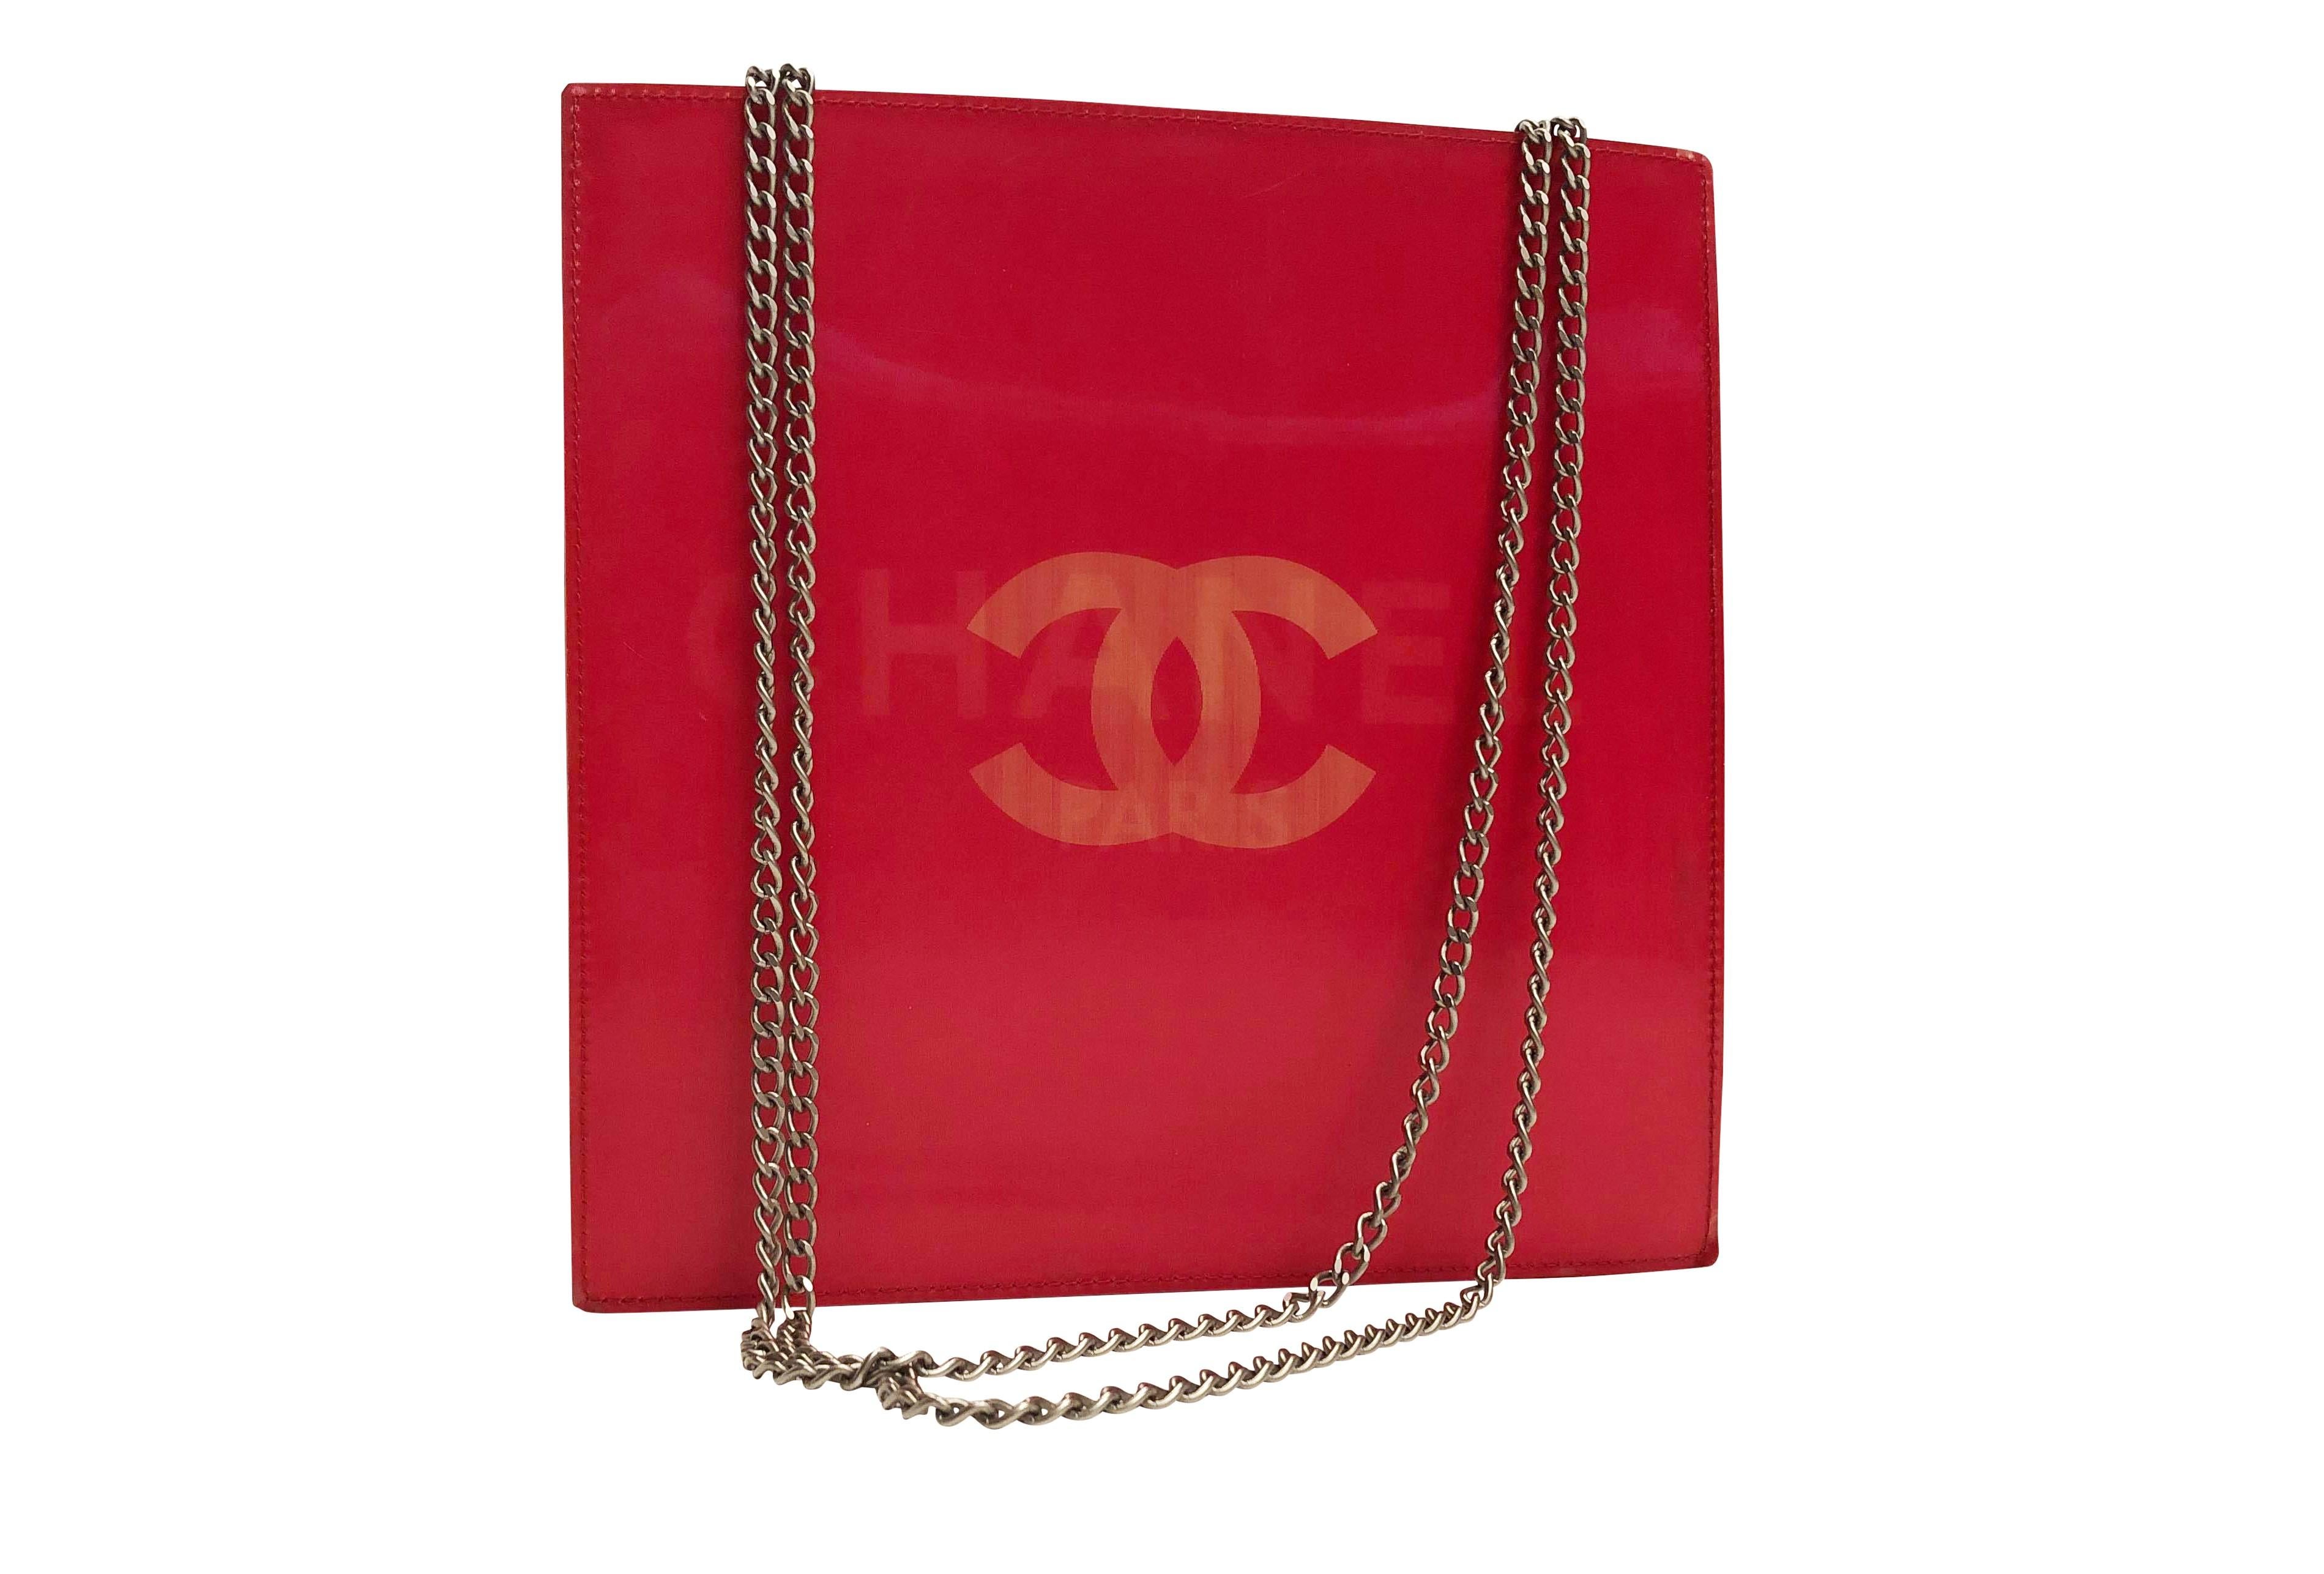 Iconic CHANEL 3D Handbag. This rare pink holographic Chanel shoulder bag features a CC CHANEL alternating holograph, single compartment with small zip pocket in vinyl lining and fine chain straps. 

From the 2000 Spring Summer collection.